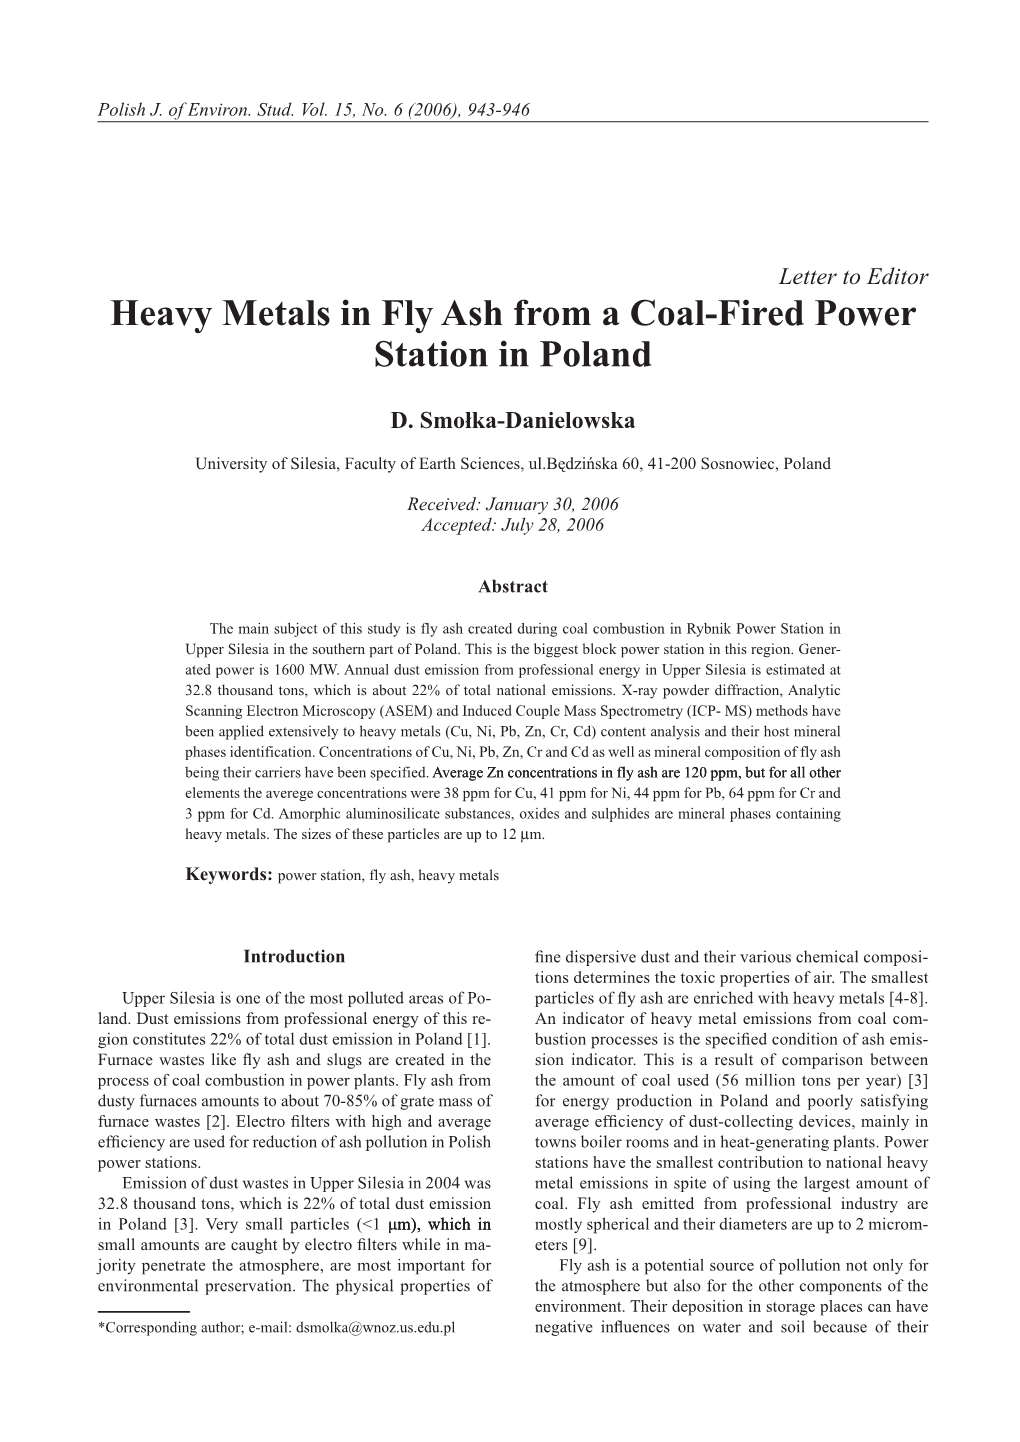 Heavy Metals in Fly Ash from a Coal-Fired Power Station in Poland